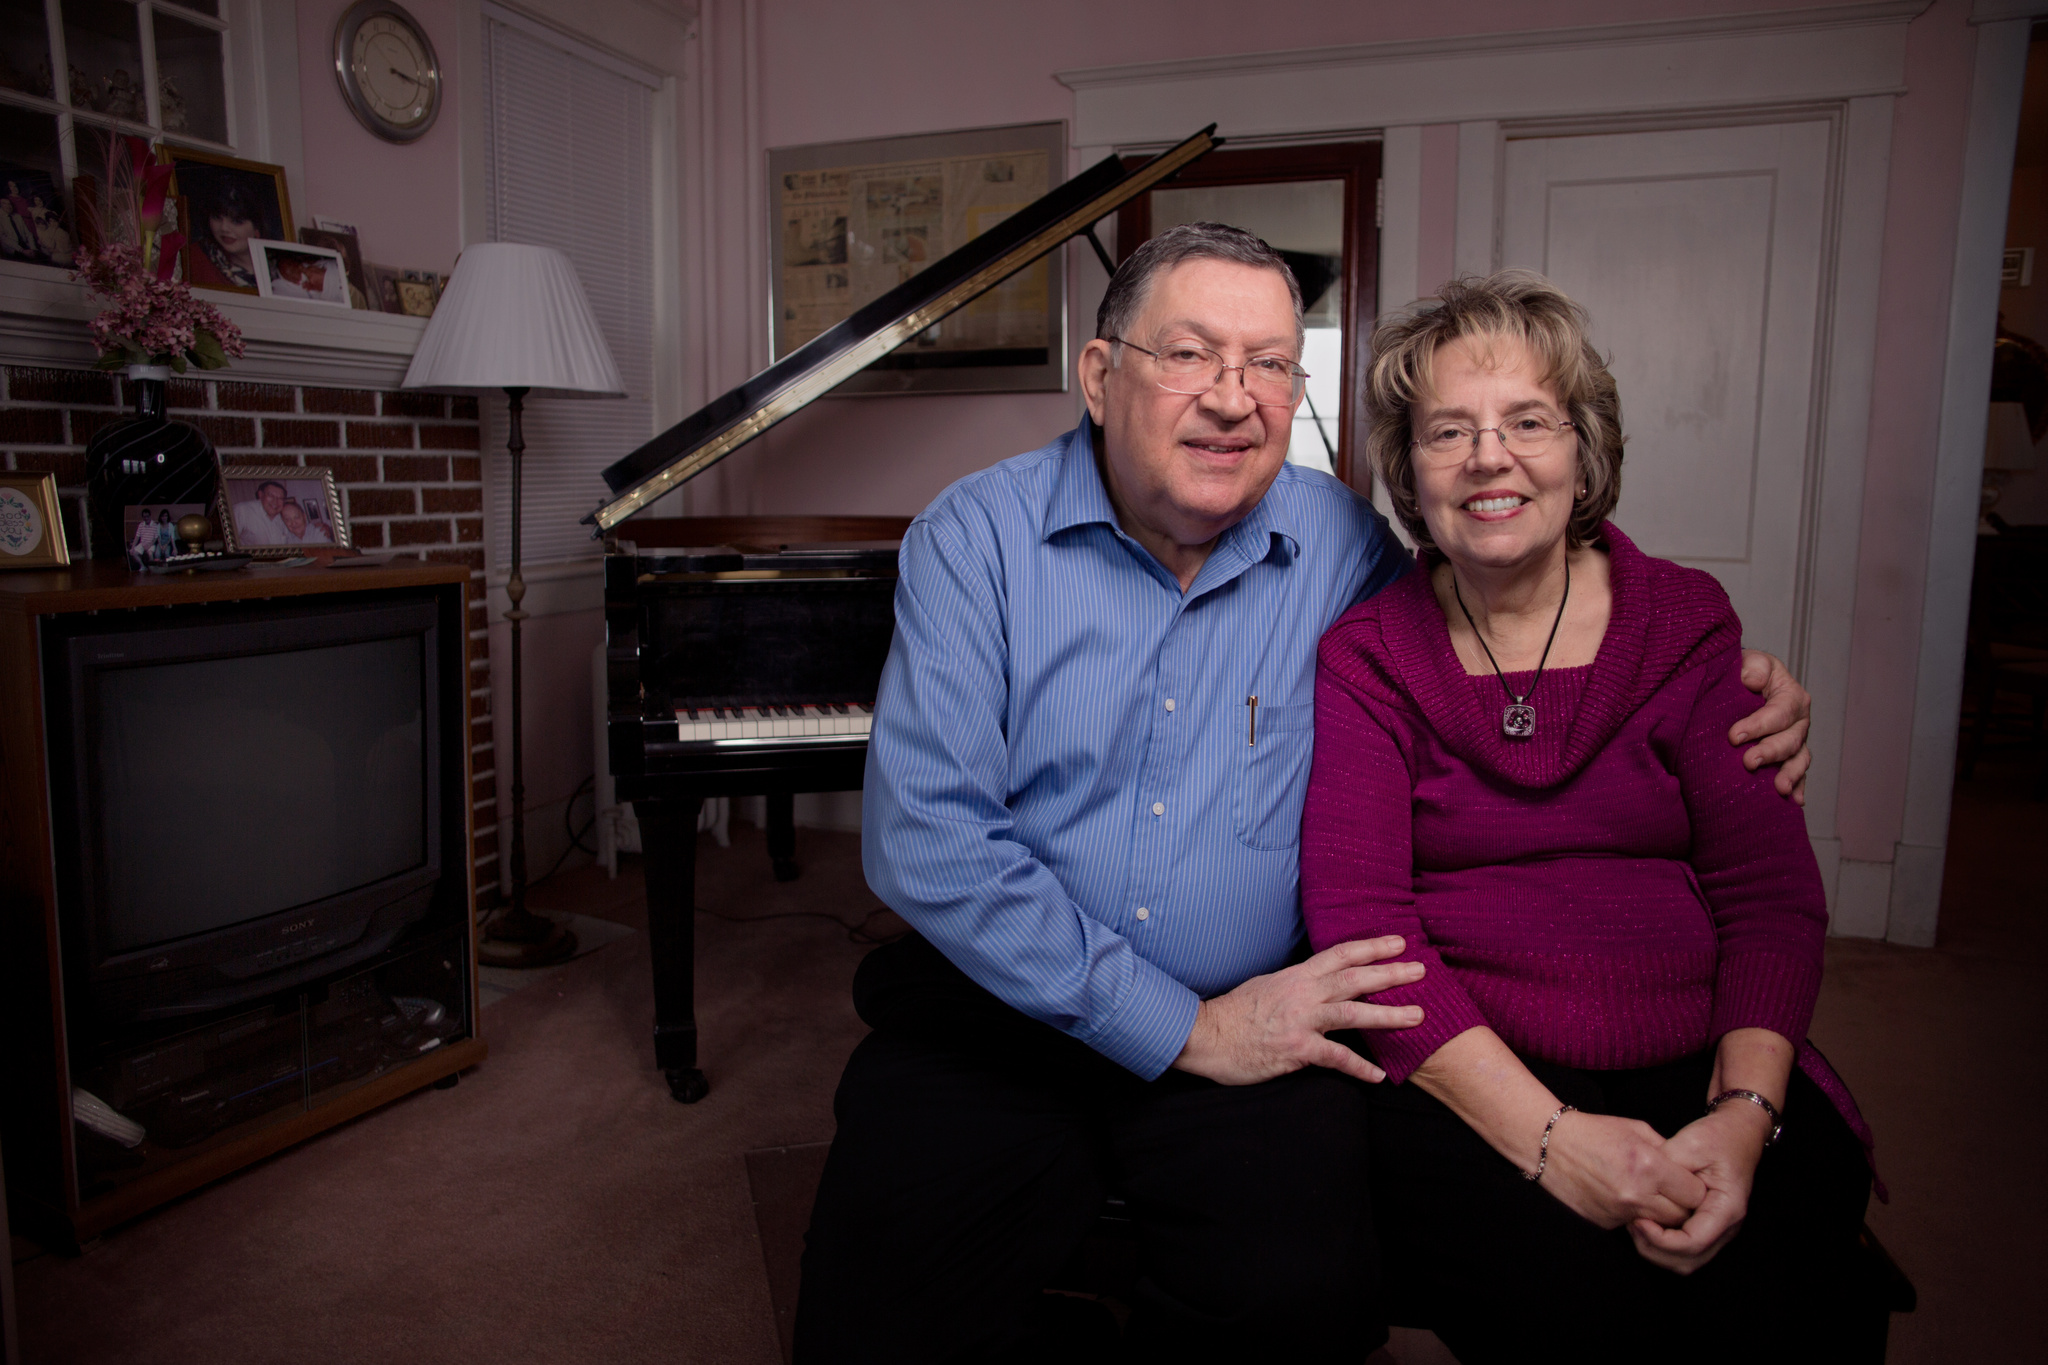 Charlie and Cindy Birnbaum sit in their Atlantic City home. Today, the New Jersey court of appeals ruled the Casino Reinvestment Development Authority, a government agency, could not take their home for real estate speculation.